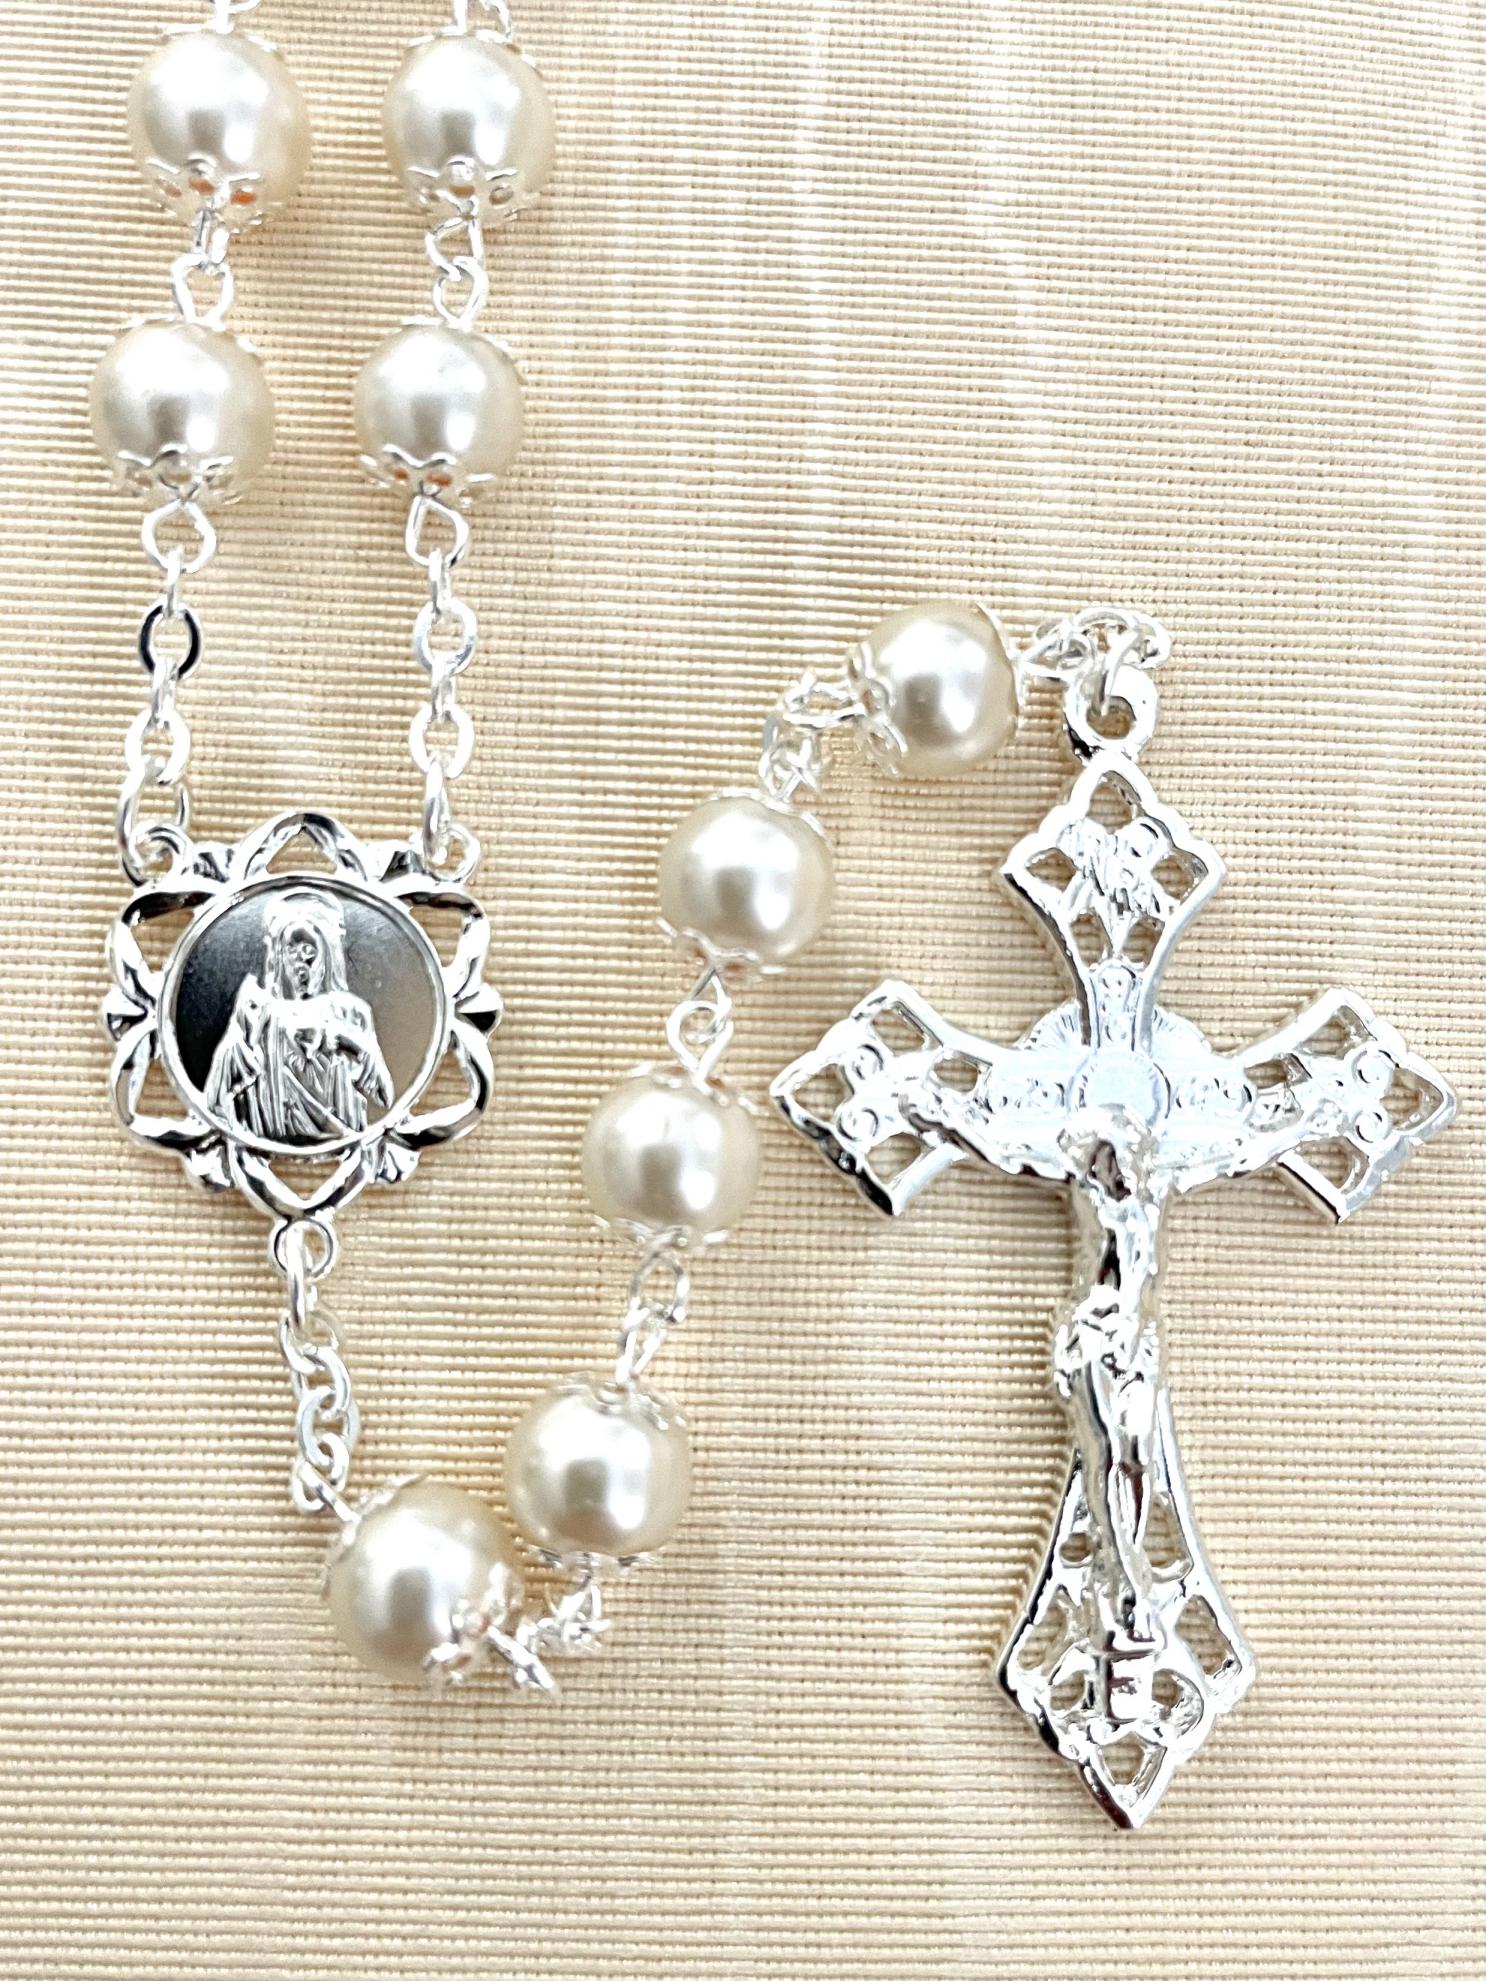 7mm PEARL DOUBLE CAPPED ROSARY WITH STERLING SILVER PLATED CRUCIFIX AND CENTER GIFT BOXED